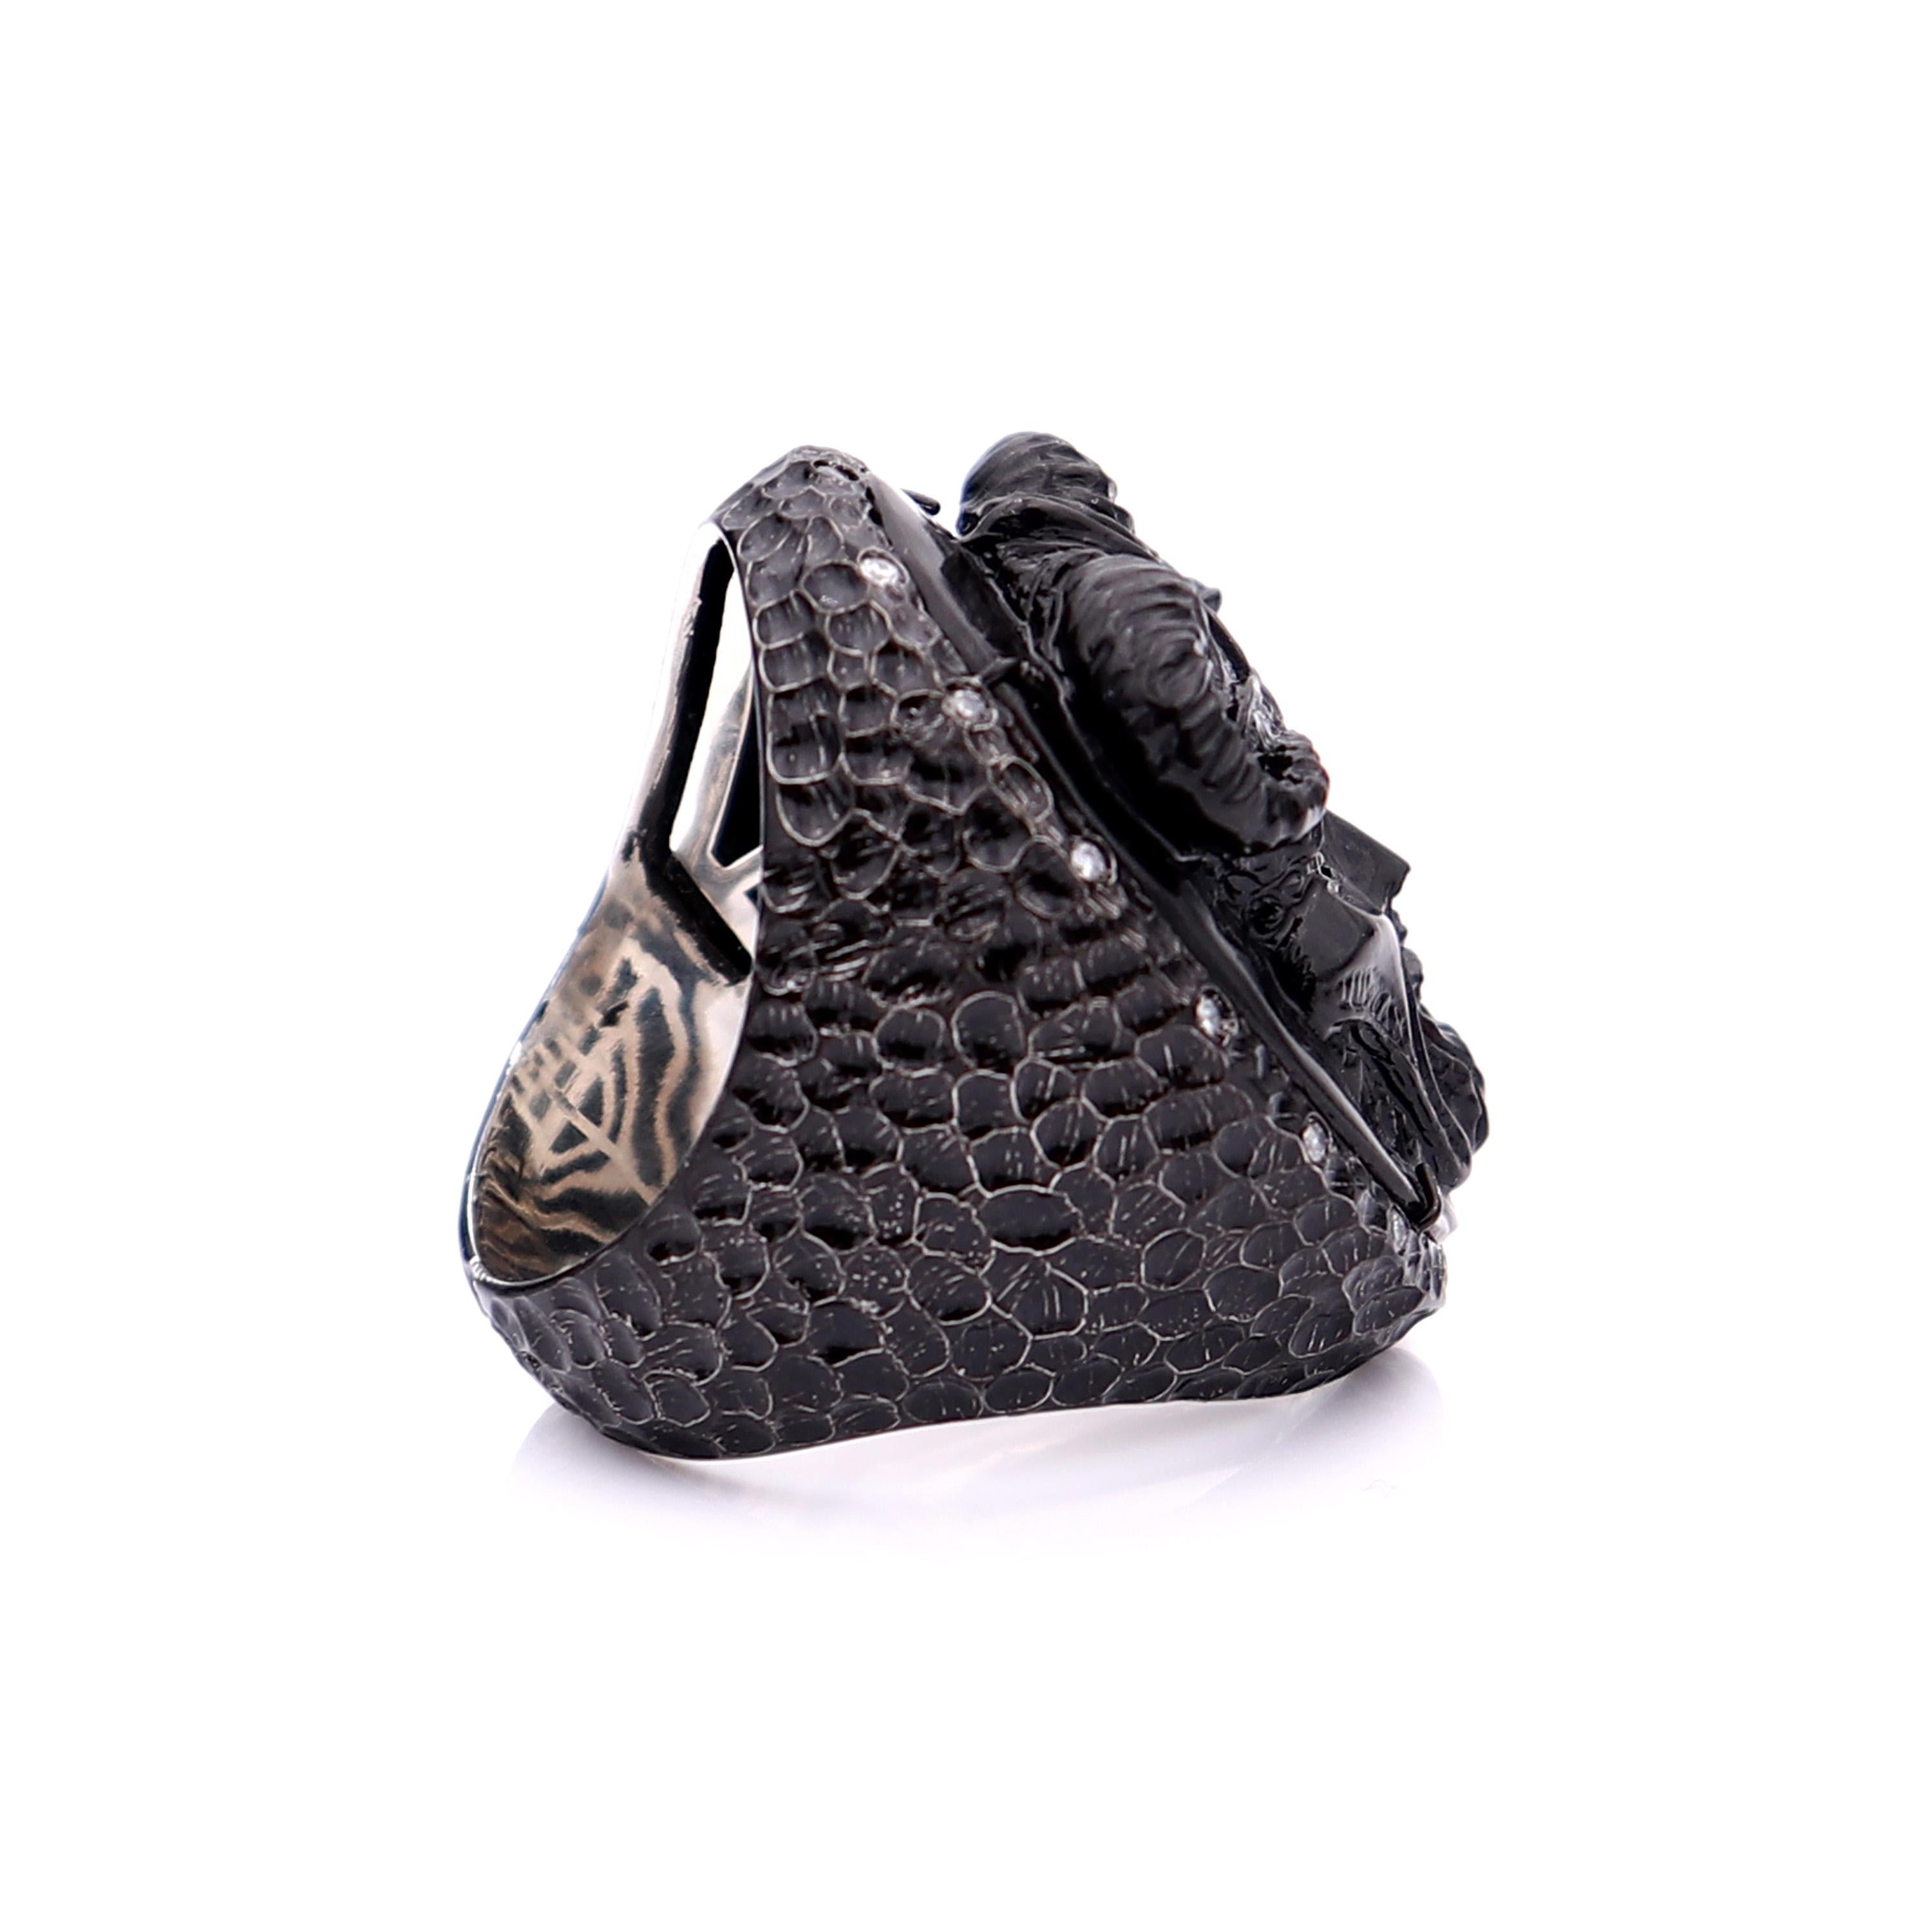 30mm black Belgian marble, hand-carved set on sterling silver black rhodium plated with 0.16cts of white diamonds.